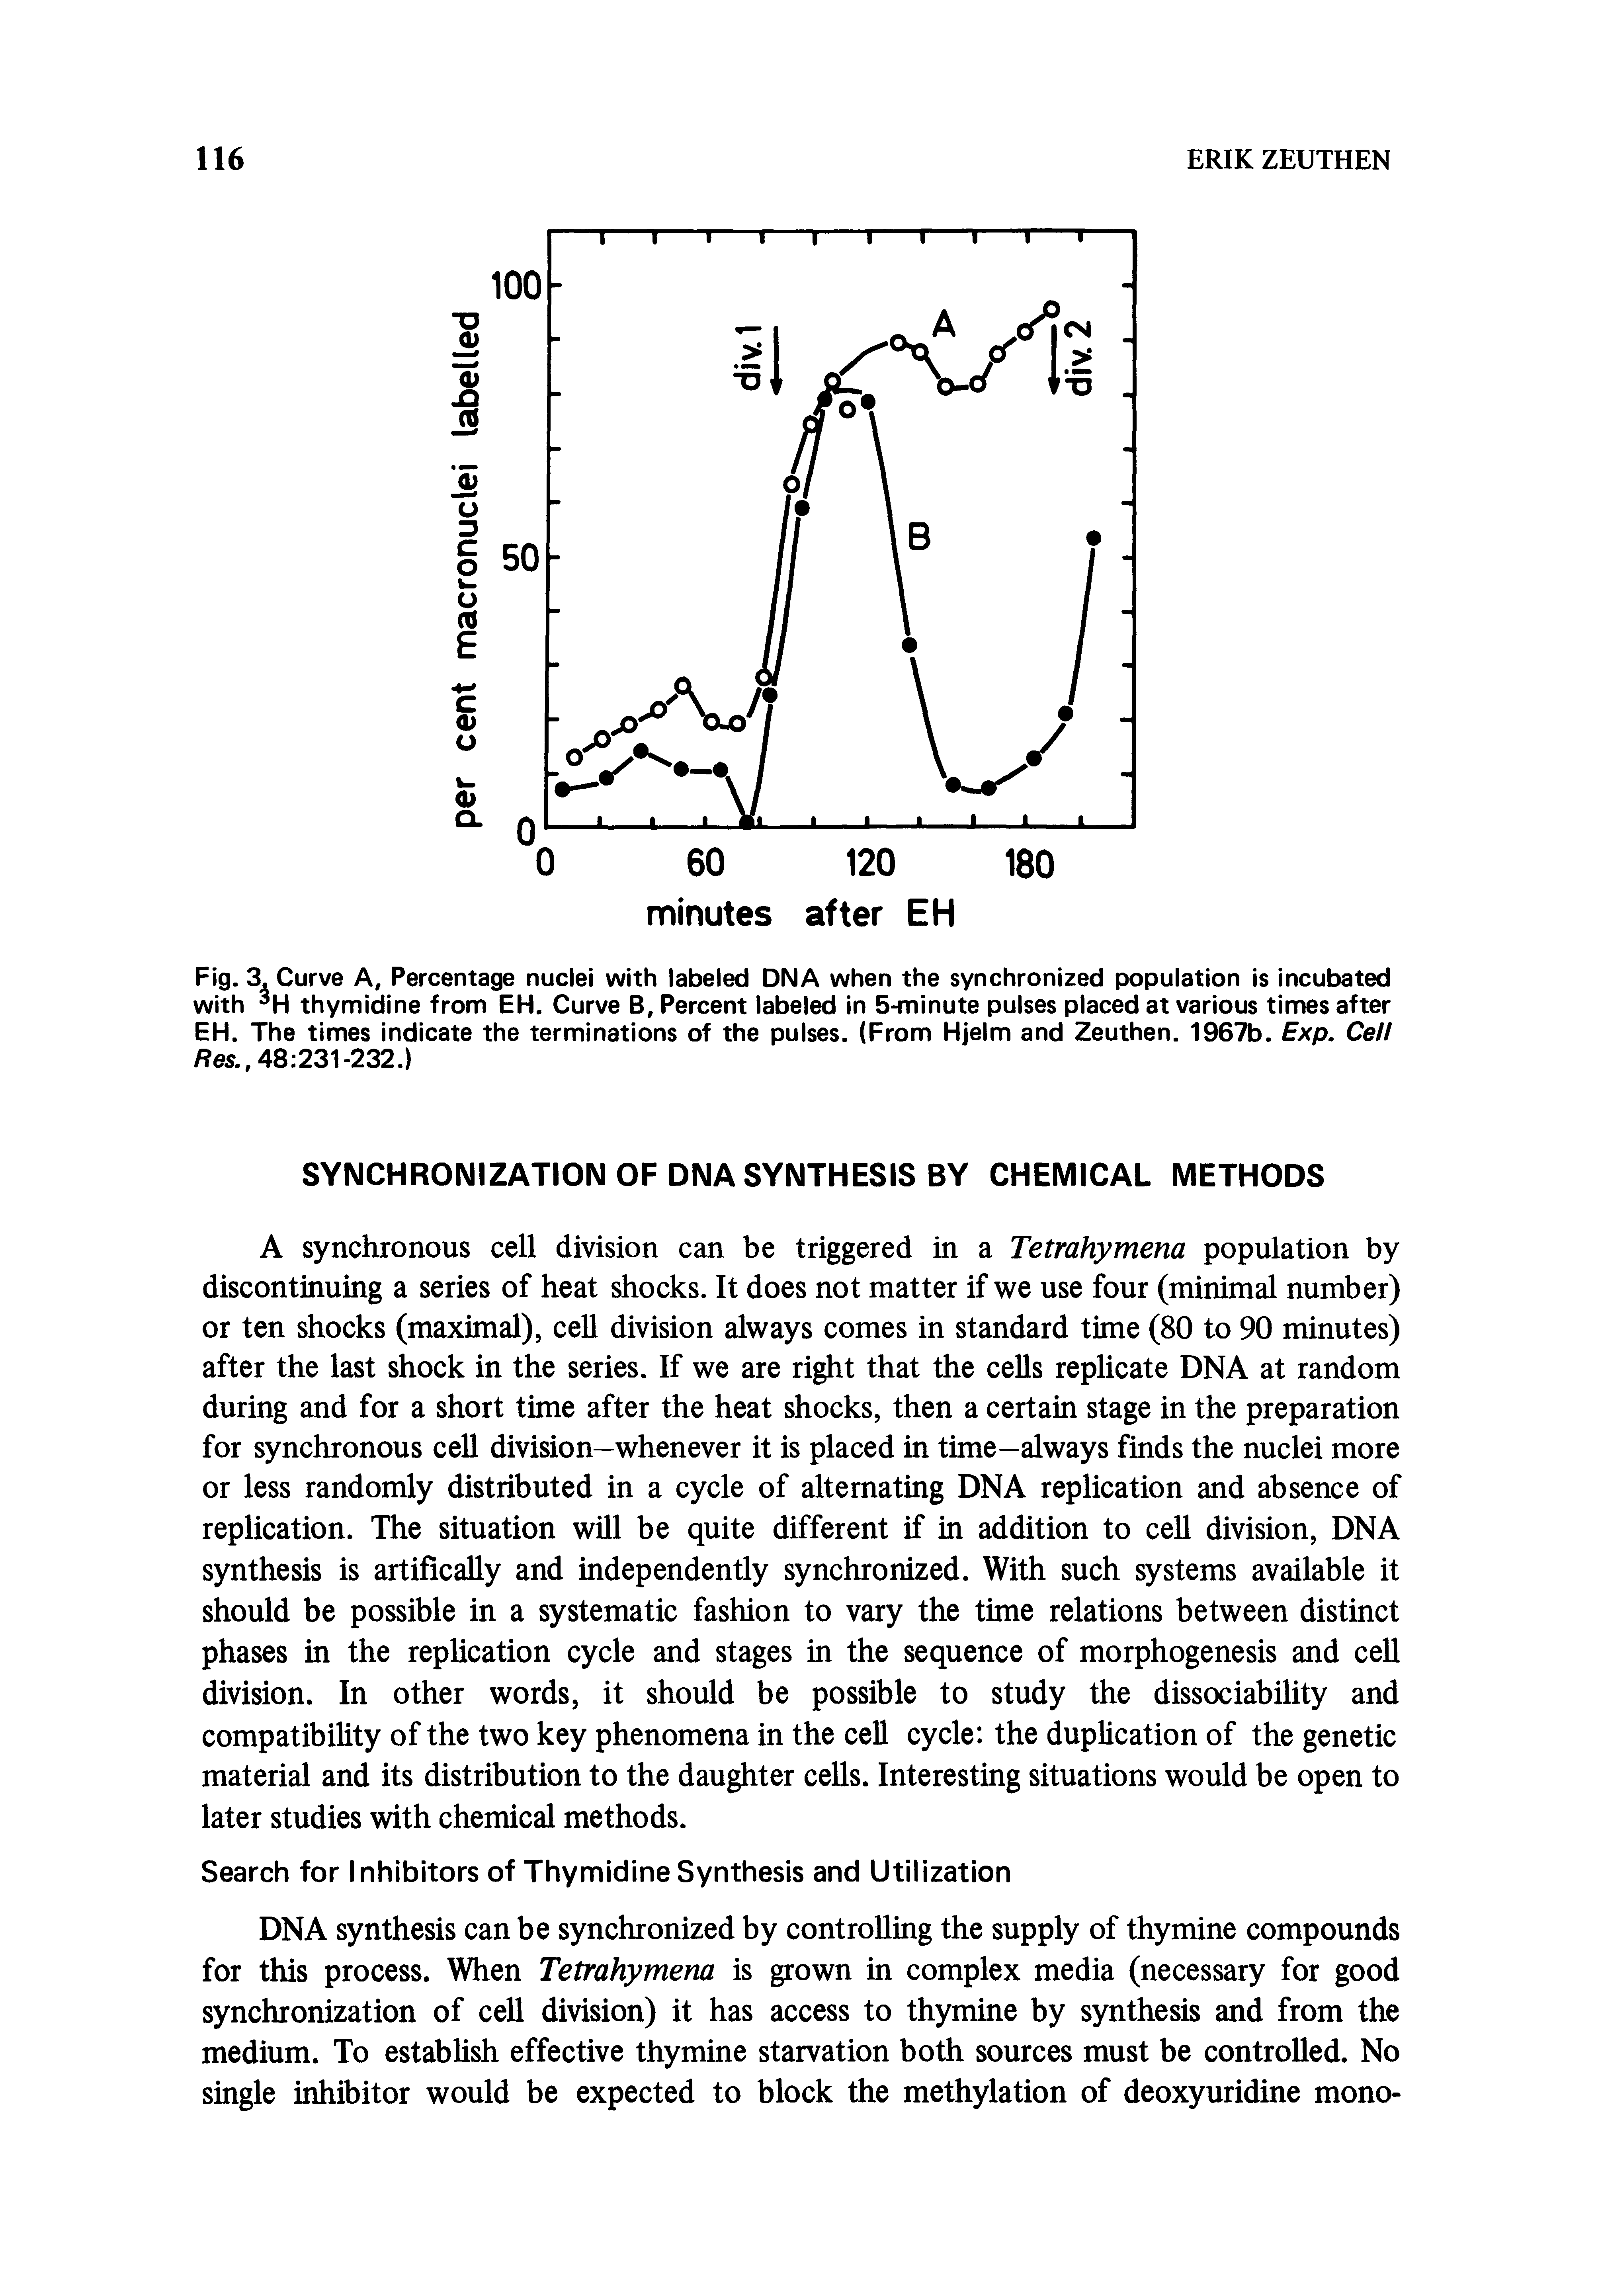 Fig. 3. Curve A, Percentage nuclei with labeled DNA when the synchronized population is incubated with thymidine from EH. Curve B, Percent labeled in 5-minute pulses placed at various times after EH. The times indicate the terminations of the pulses. (From Hjelm and Zeuthen. 1967b. Exp. Cell / es., 48 231-232.)...